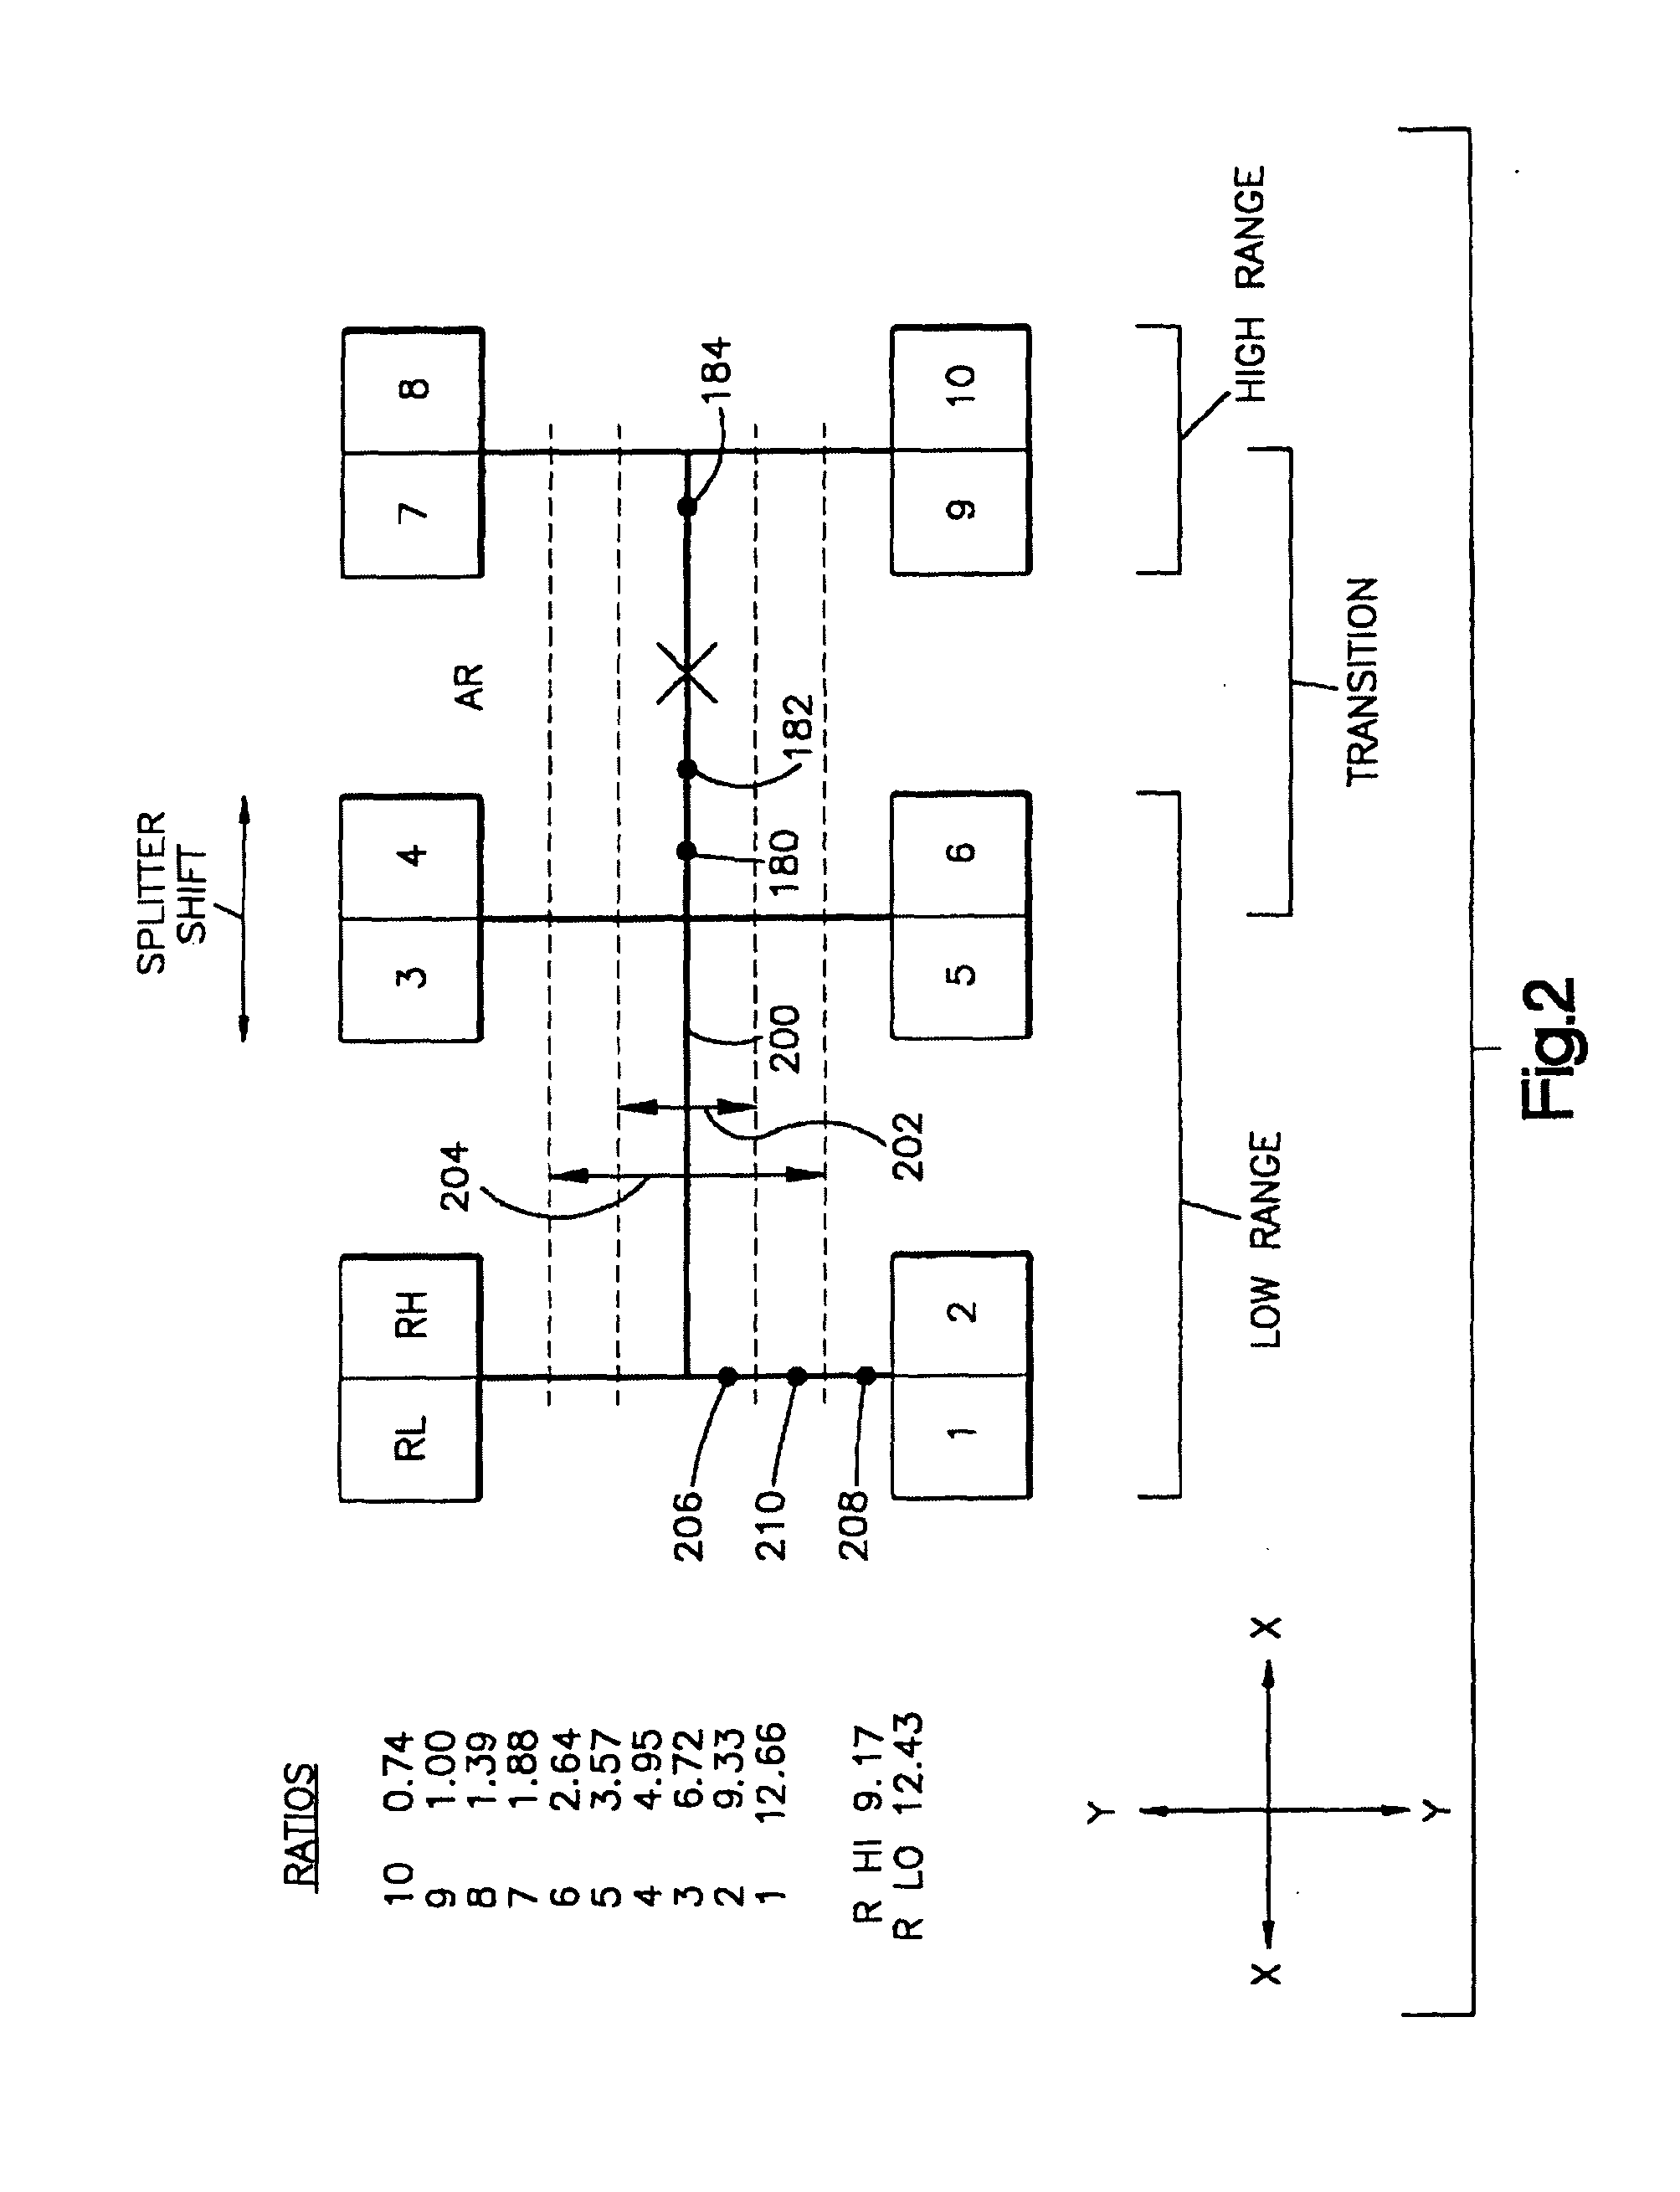 Automatic range up-shift control and method of operation